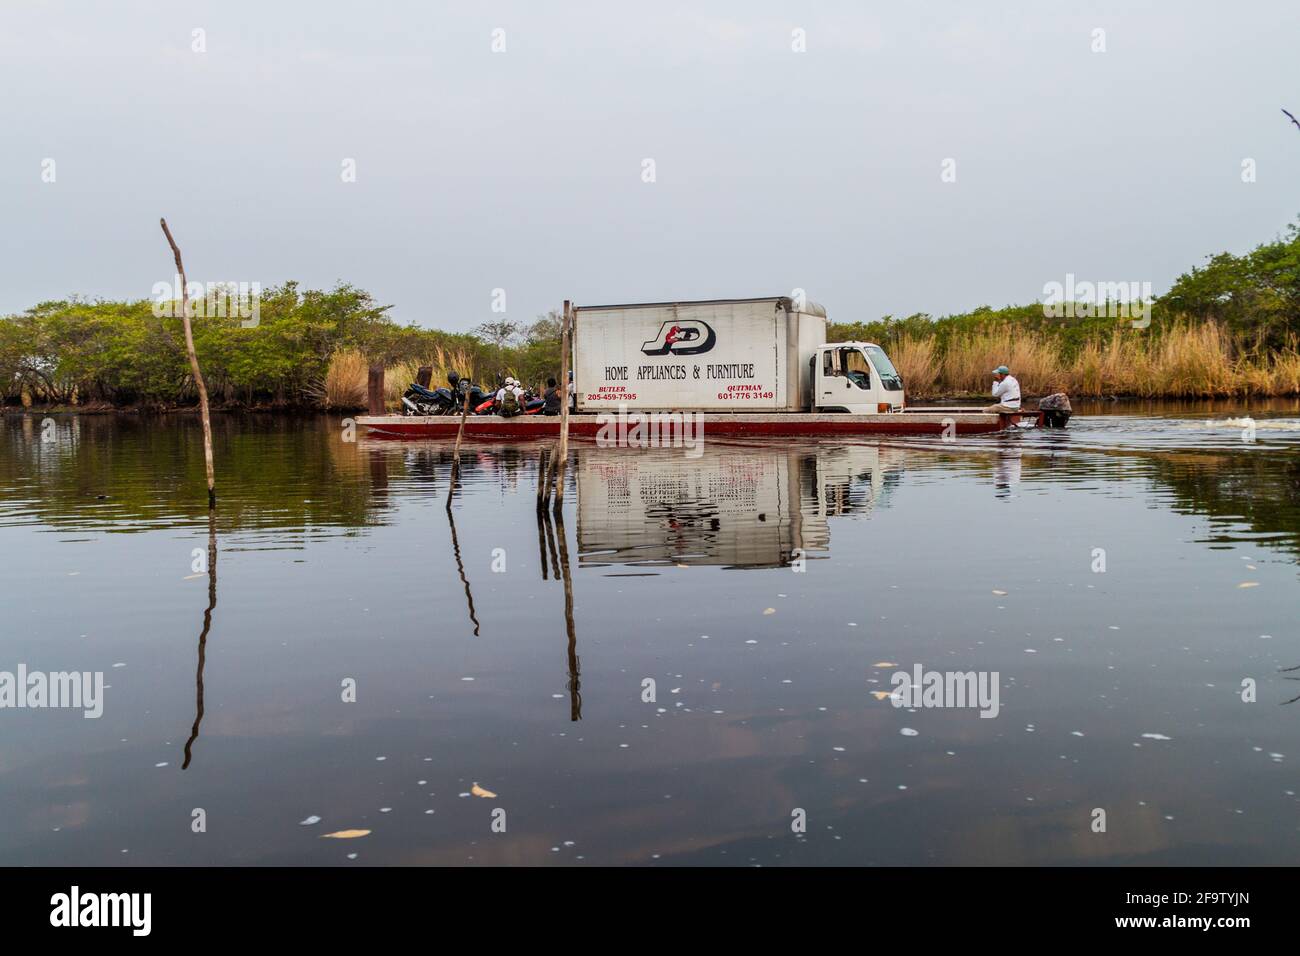 MONTERRICO, GUATEMALA - MARCH 30, 2016: Ferry loaded with a truck in the wetlands of the wildlife reserve Biotopo Monterrico-Hawaii, Guatemala Stock Photo